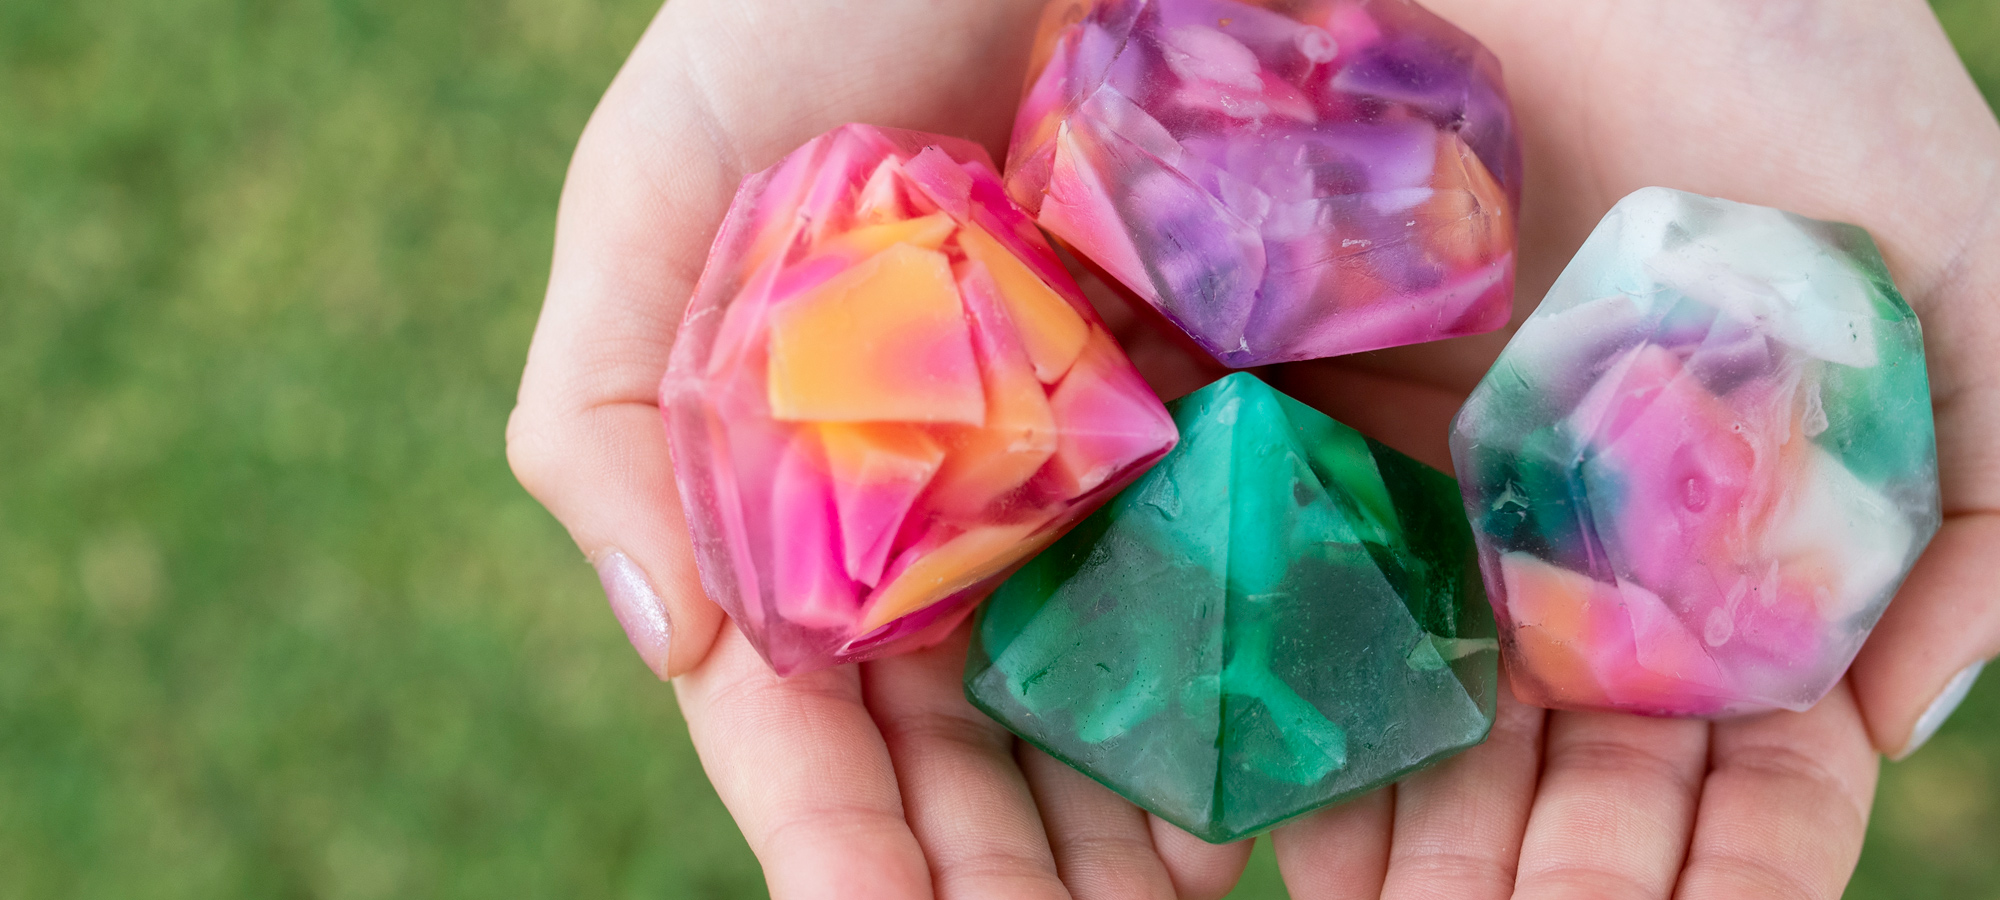 Hands holding colorful diamond shaped hand soaps